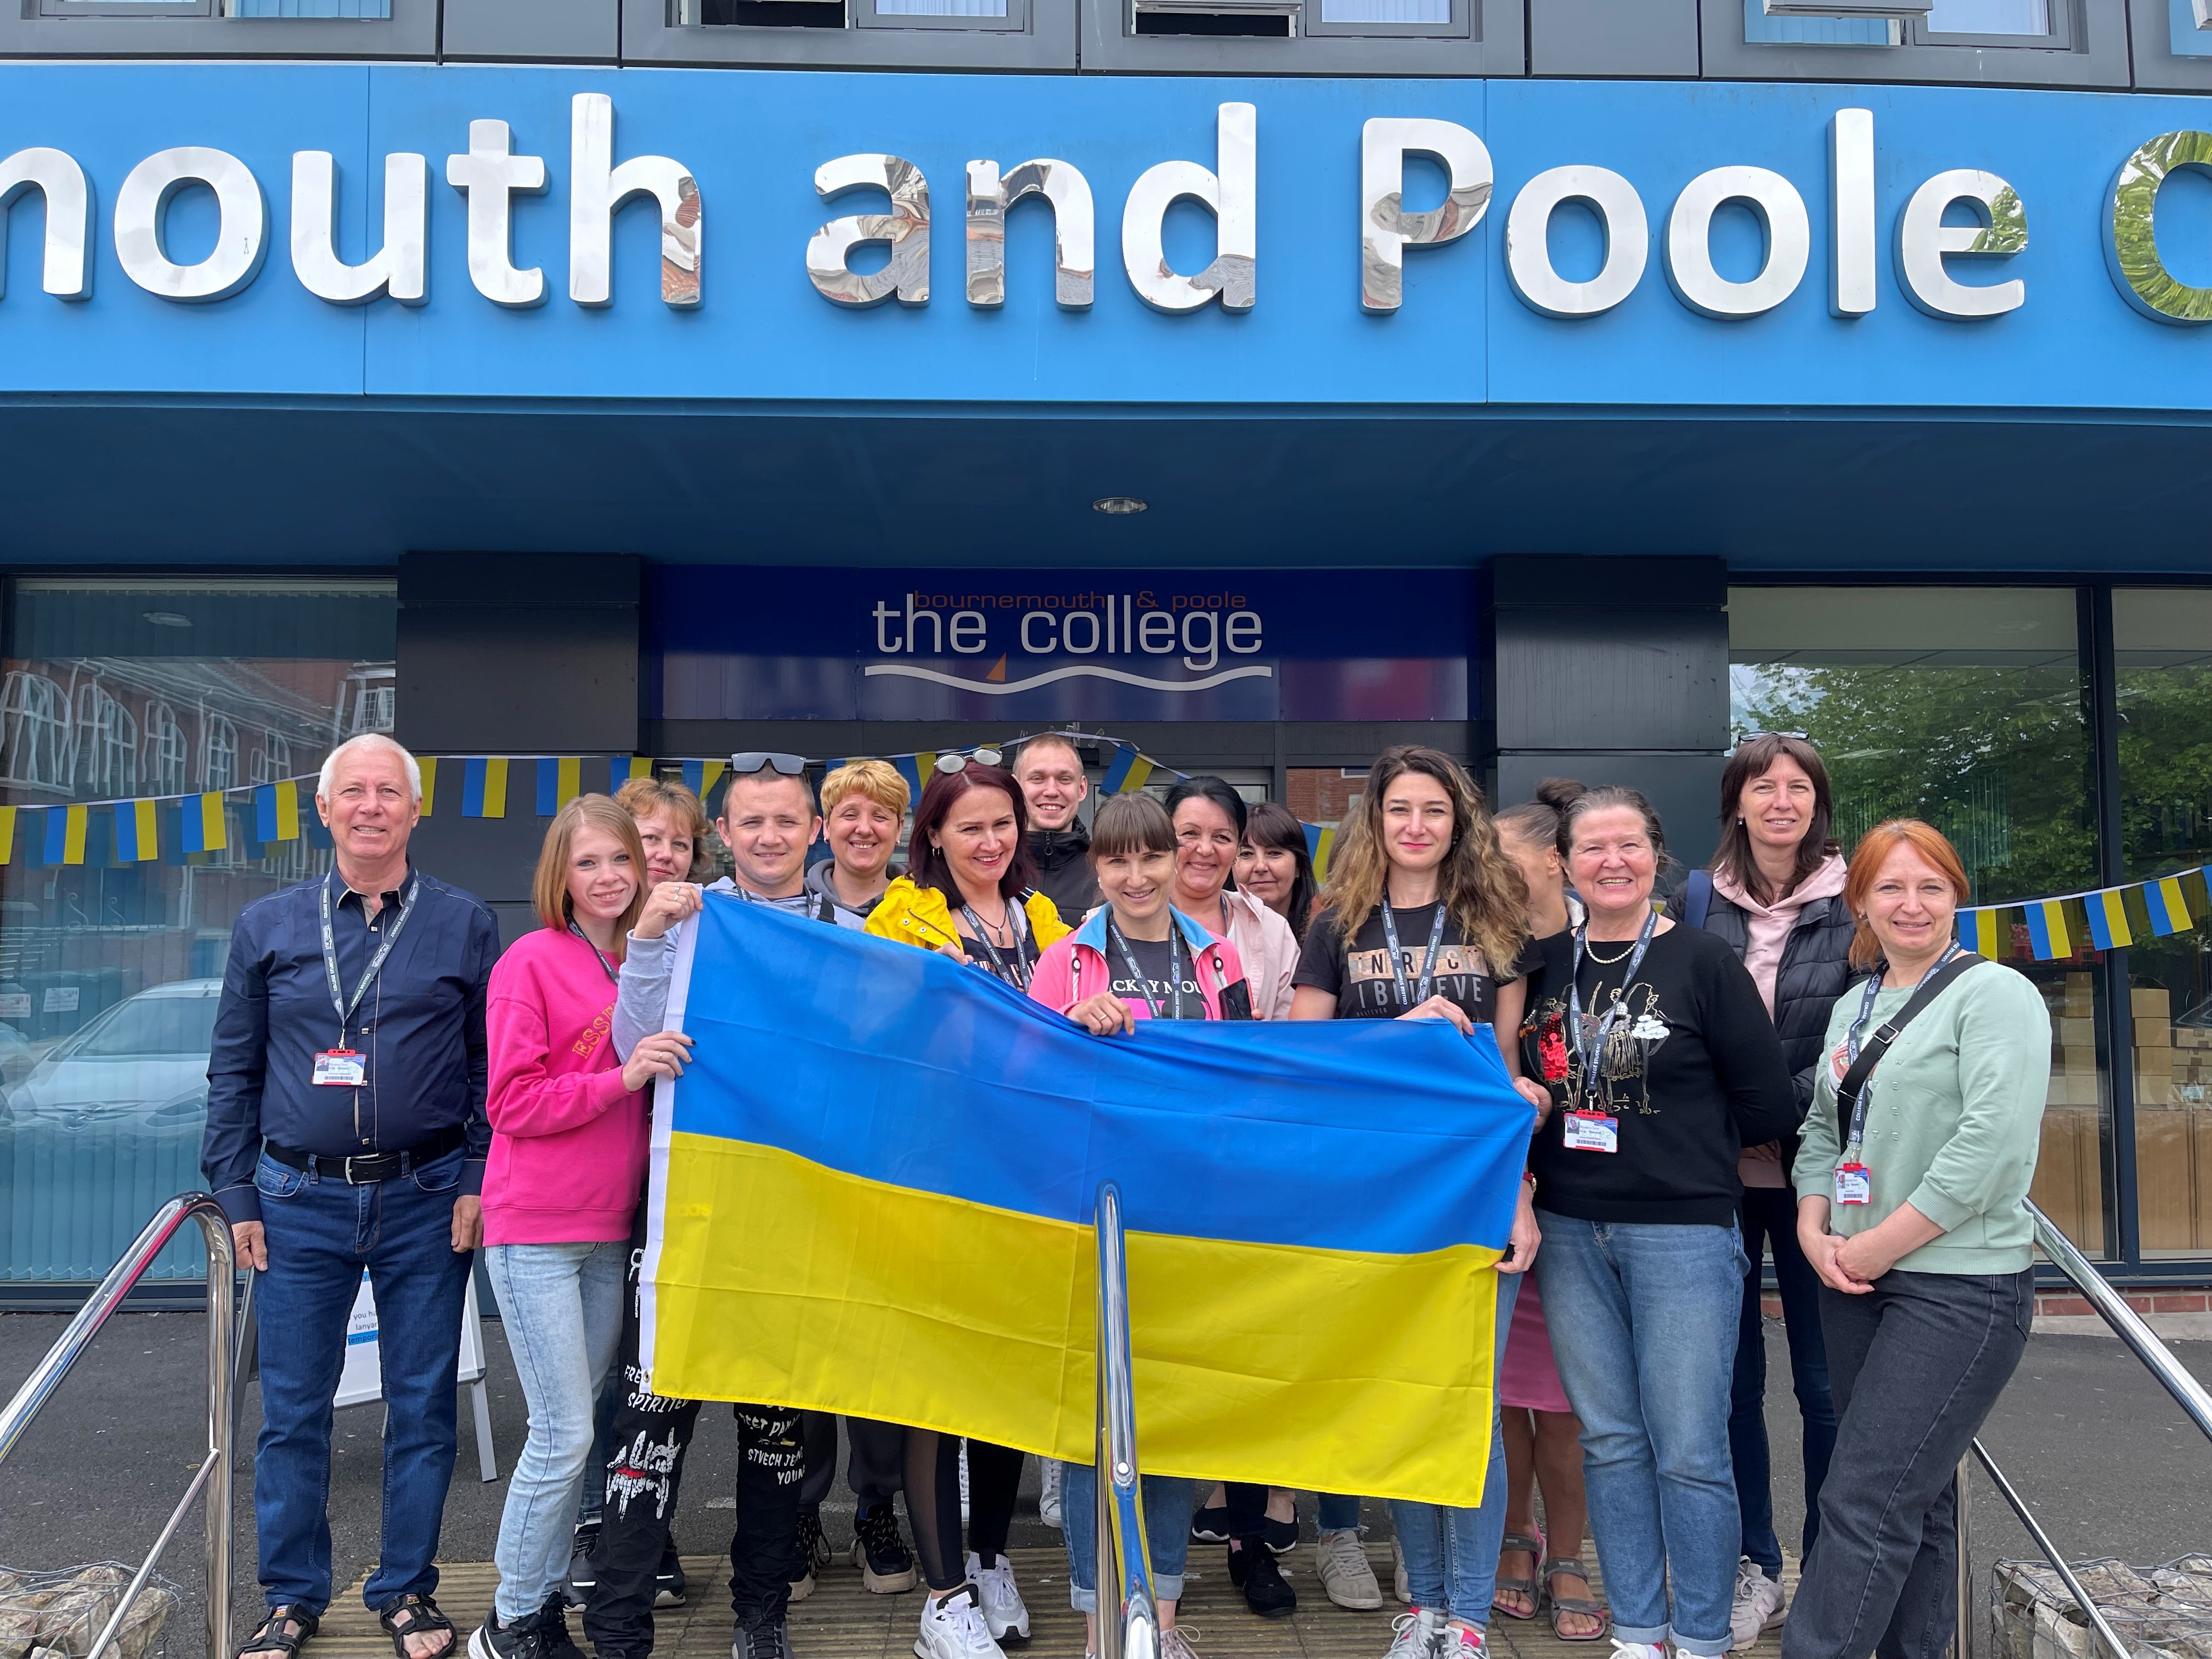 First Ukrainian refugees enrol at Bournemouth & Poole College after fleeing Russian invasion